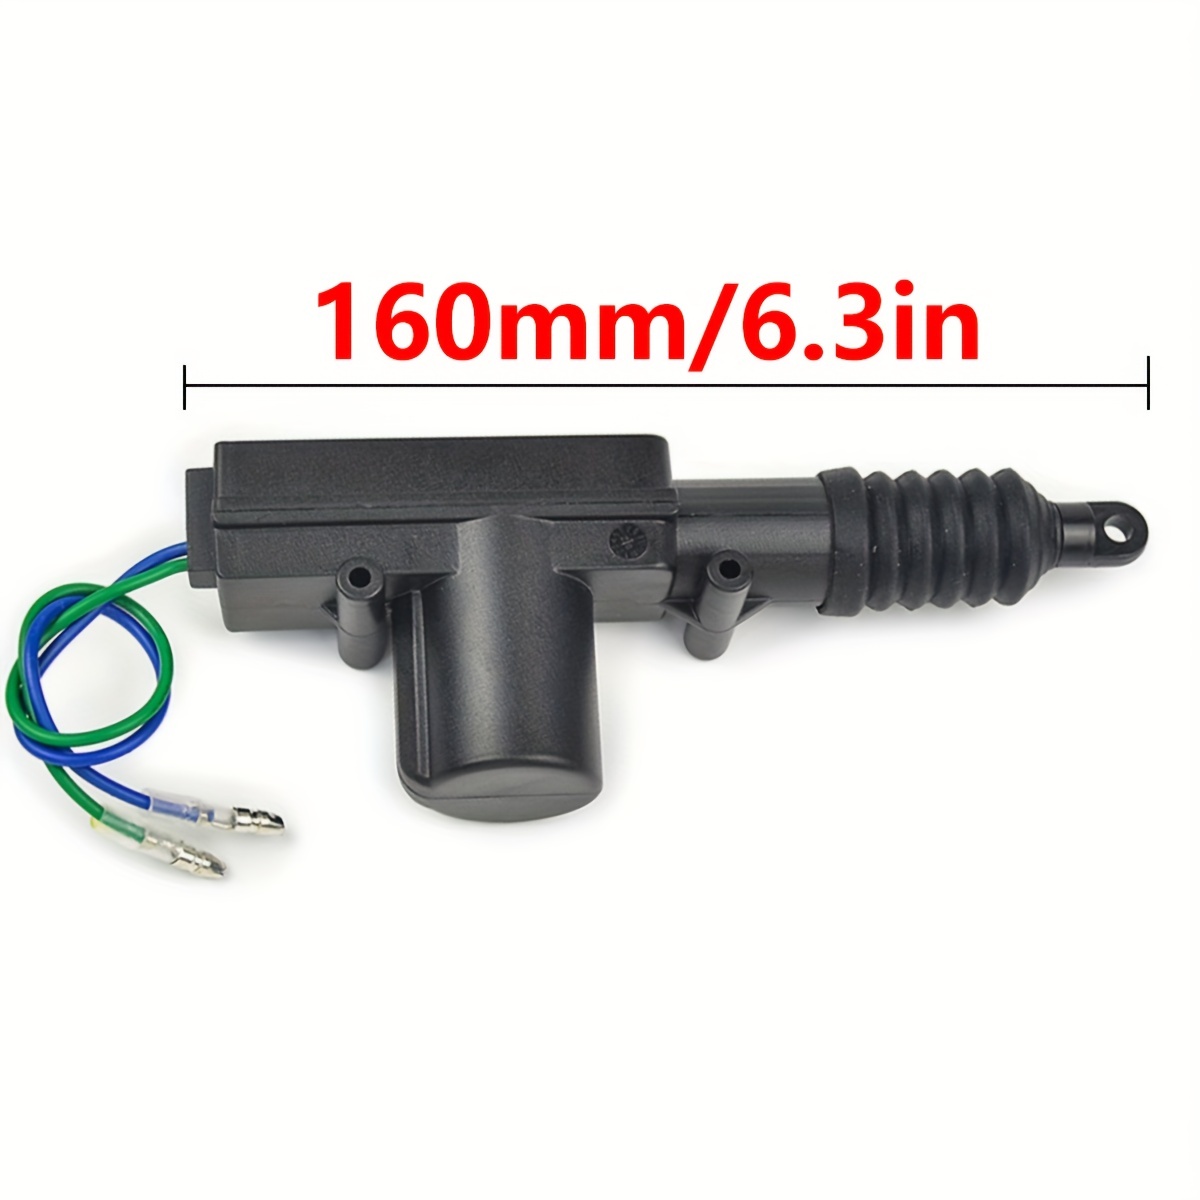 12V 2 Cable Universal Car Door Power Central Lock Motor Kit Con 2 Cable Actuador Auto Vehículo Central Locking Control Station Kit